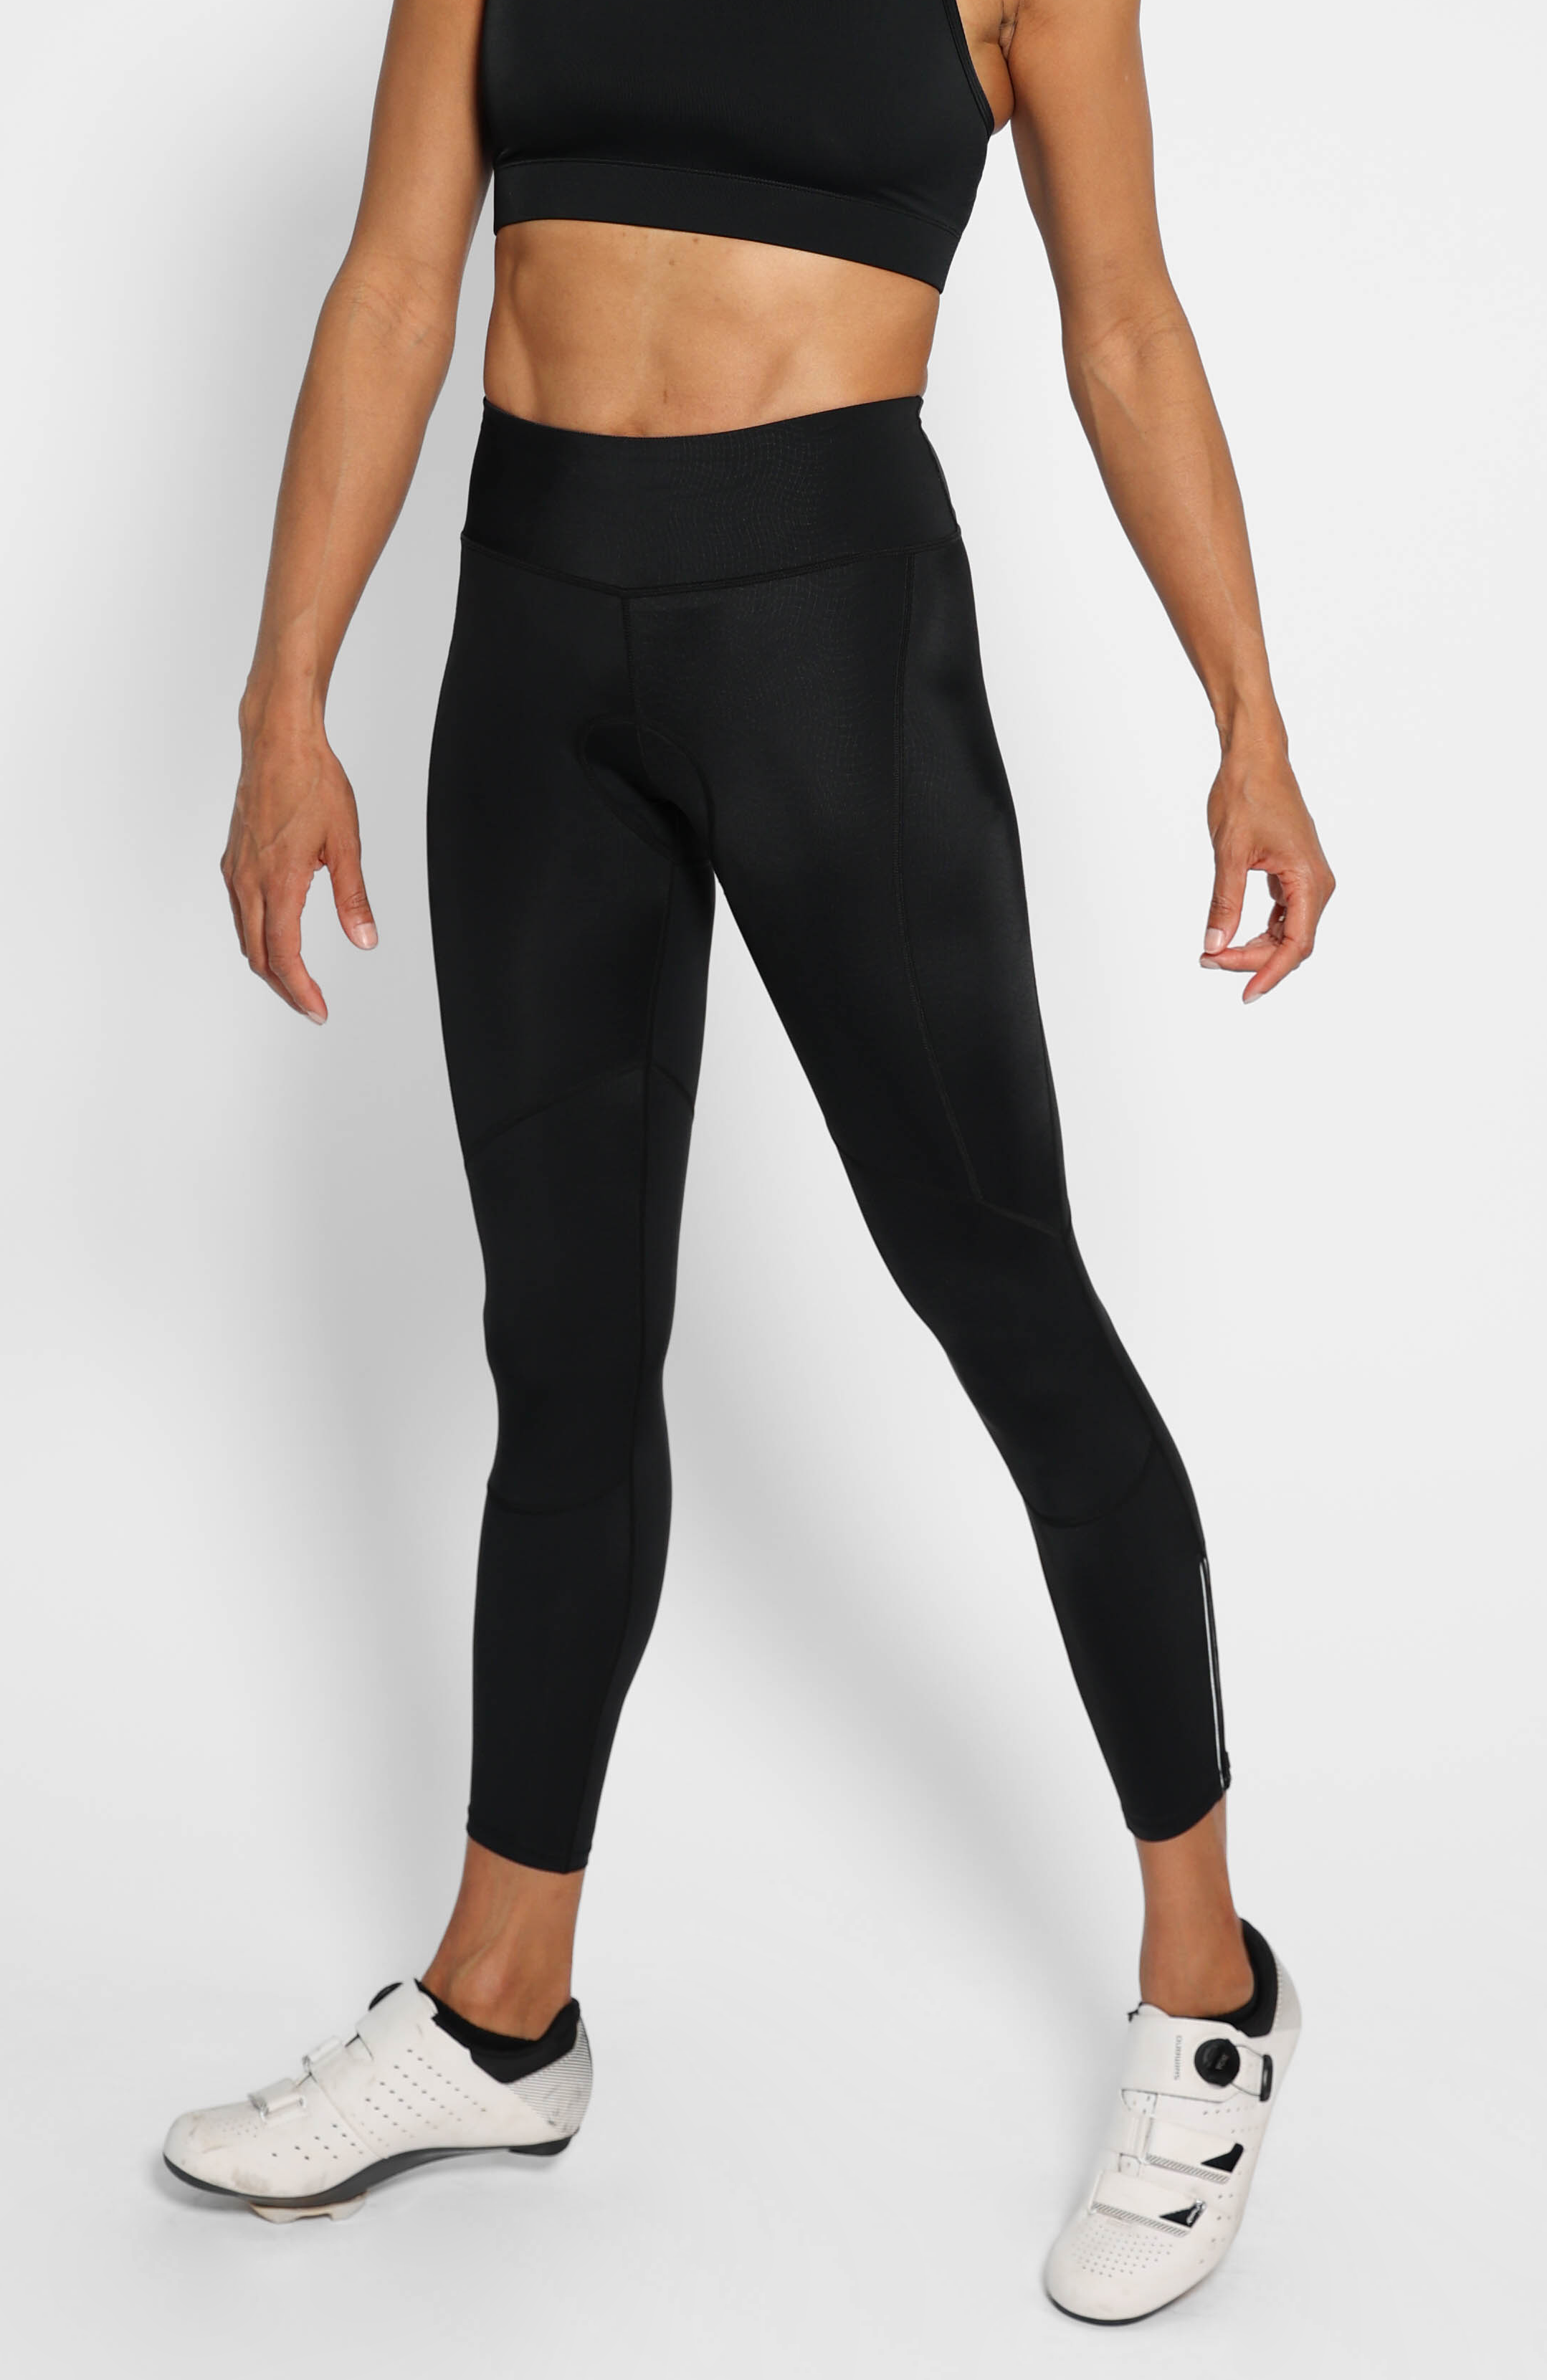 Little Black Cycling Tights